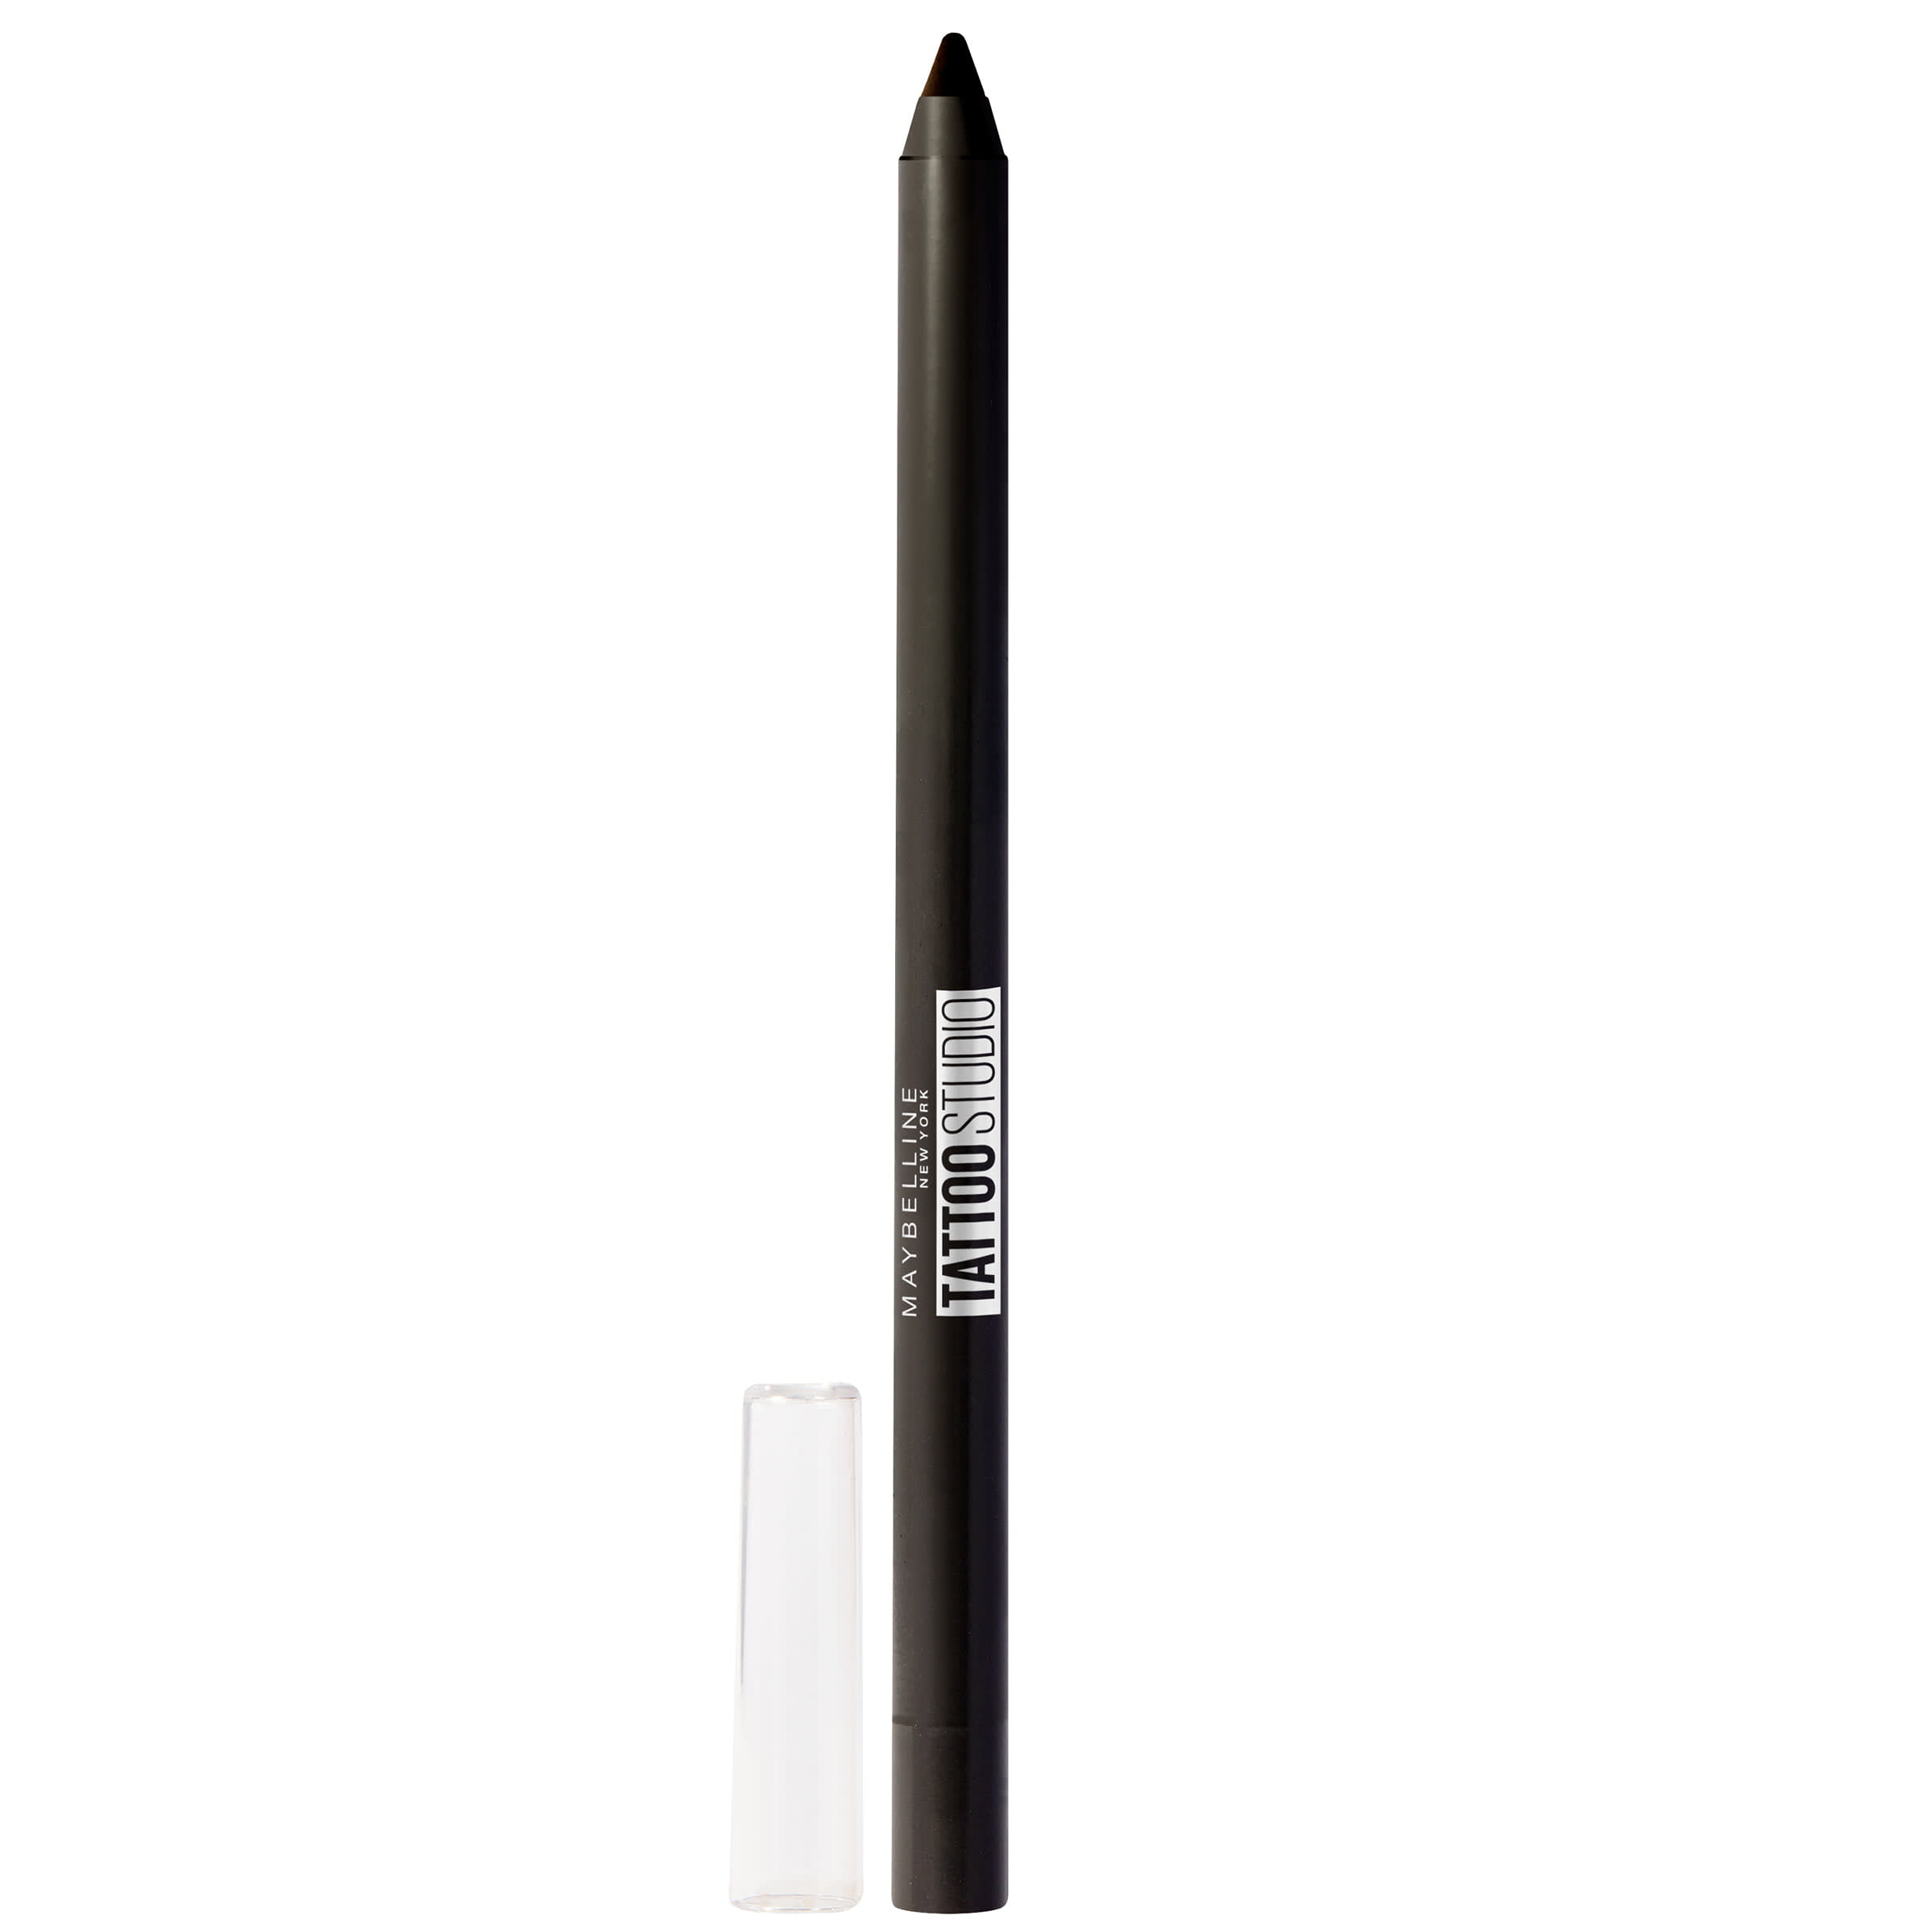 Maybelline Line Tattoo Impact Pen Eyeliner Review